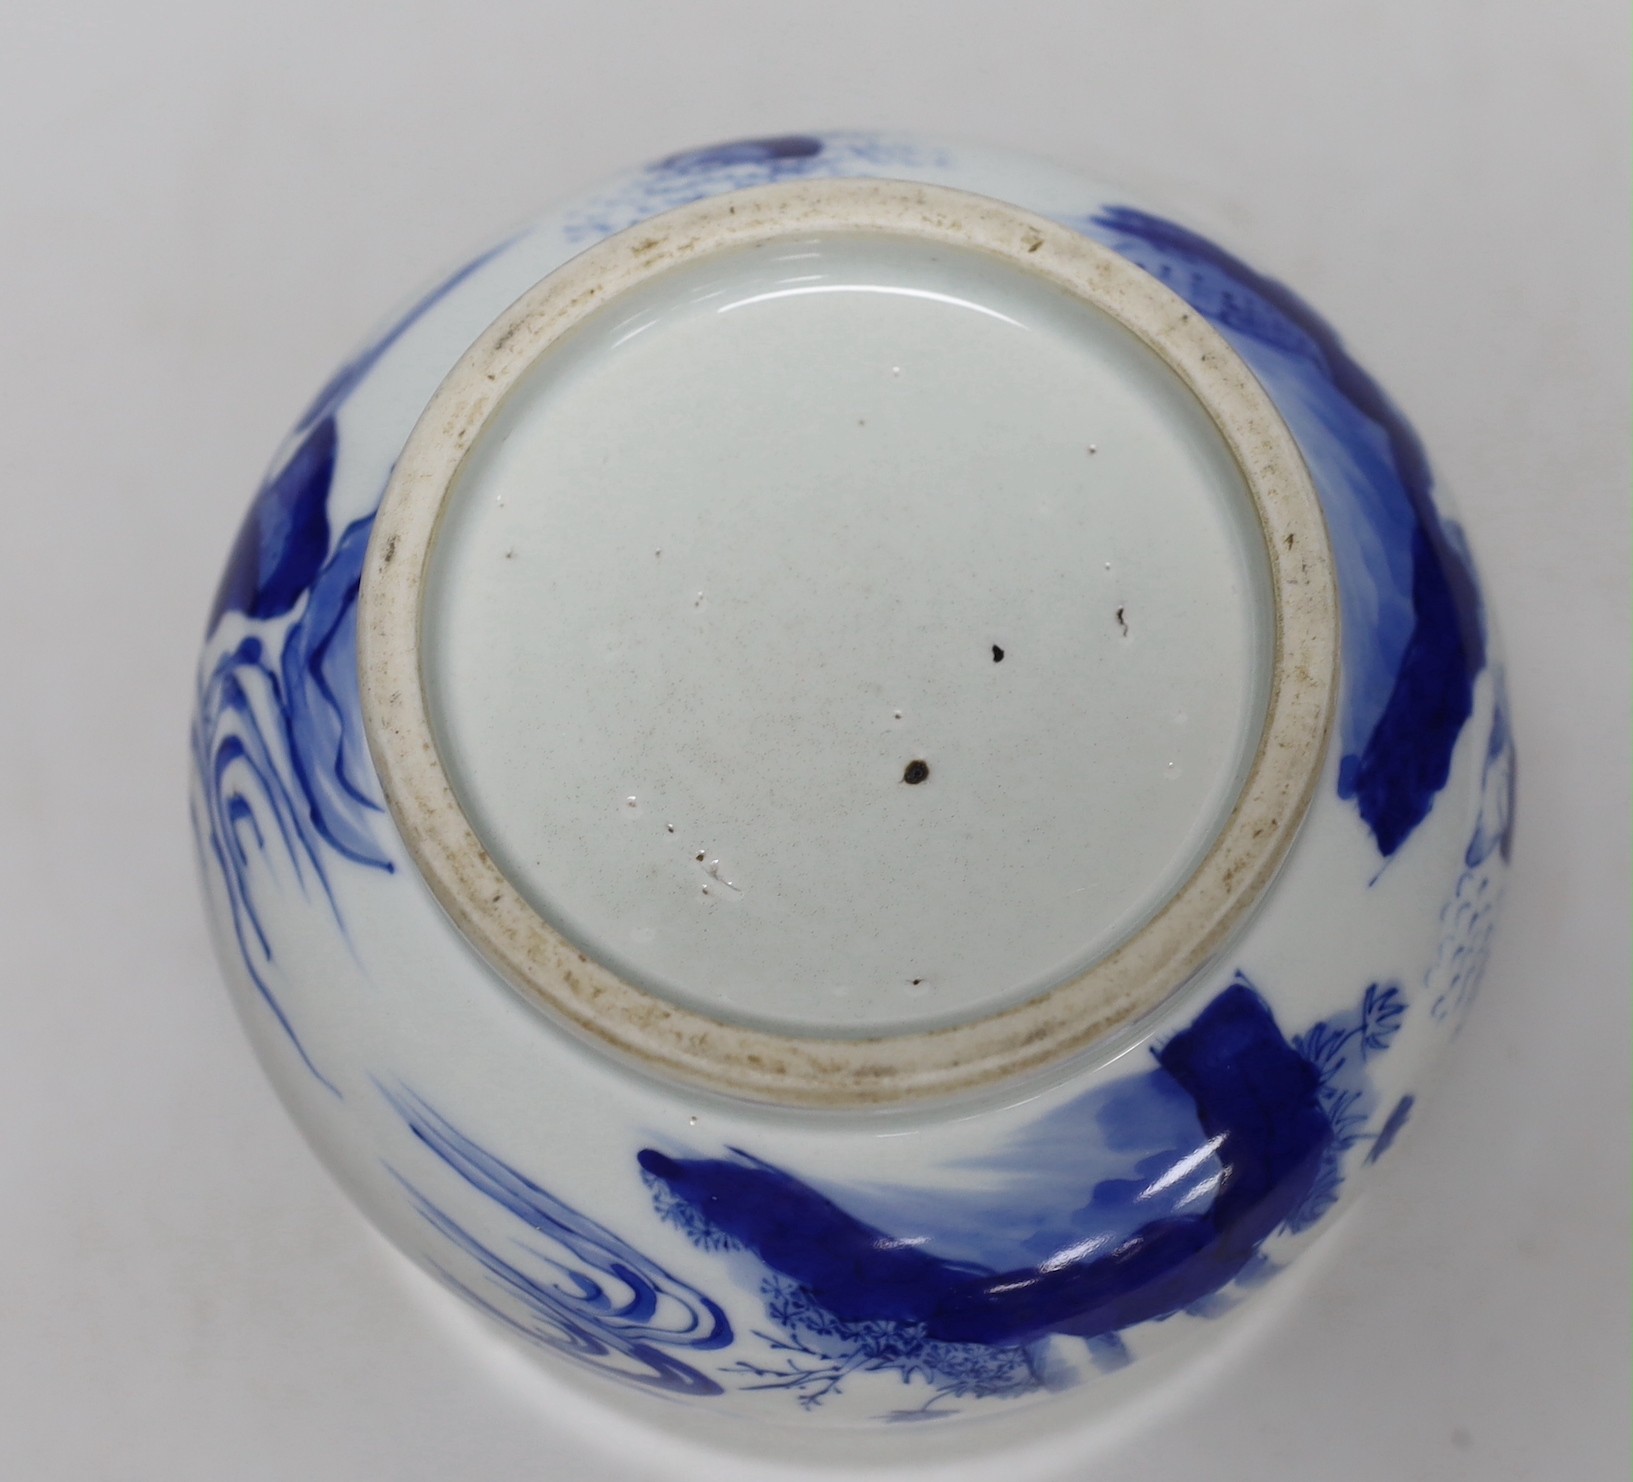 A Chinese blue and white figurative 'boys' bowl, 11cm high